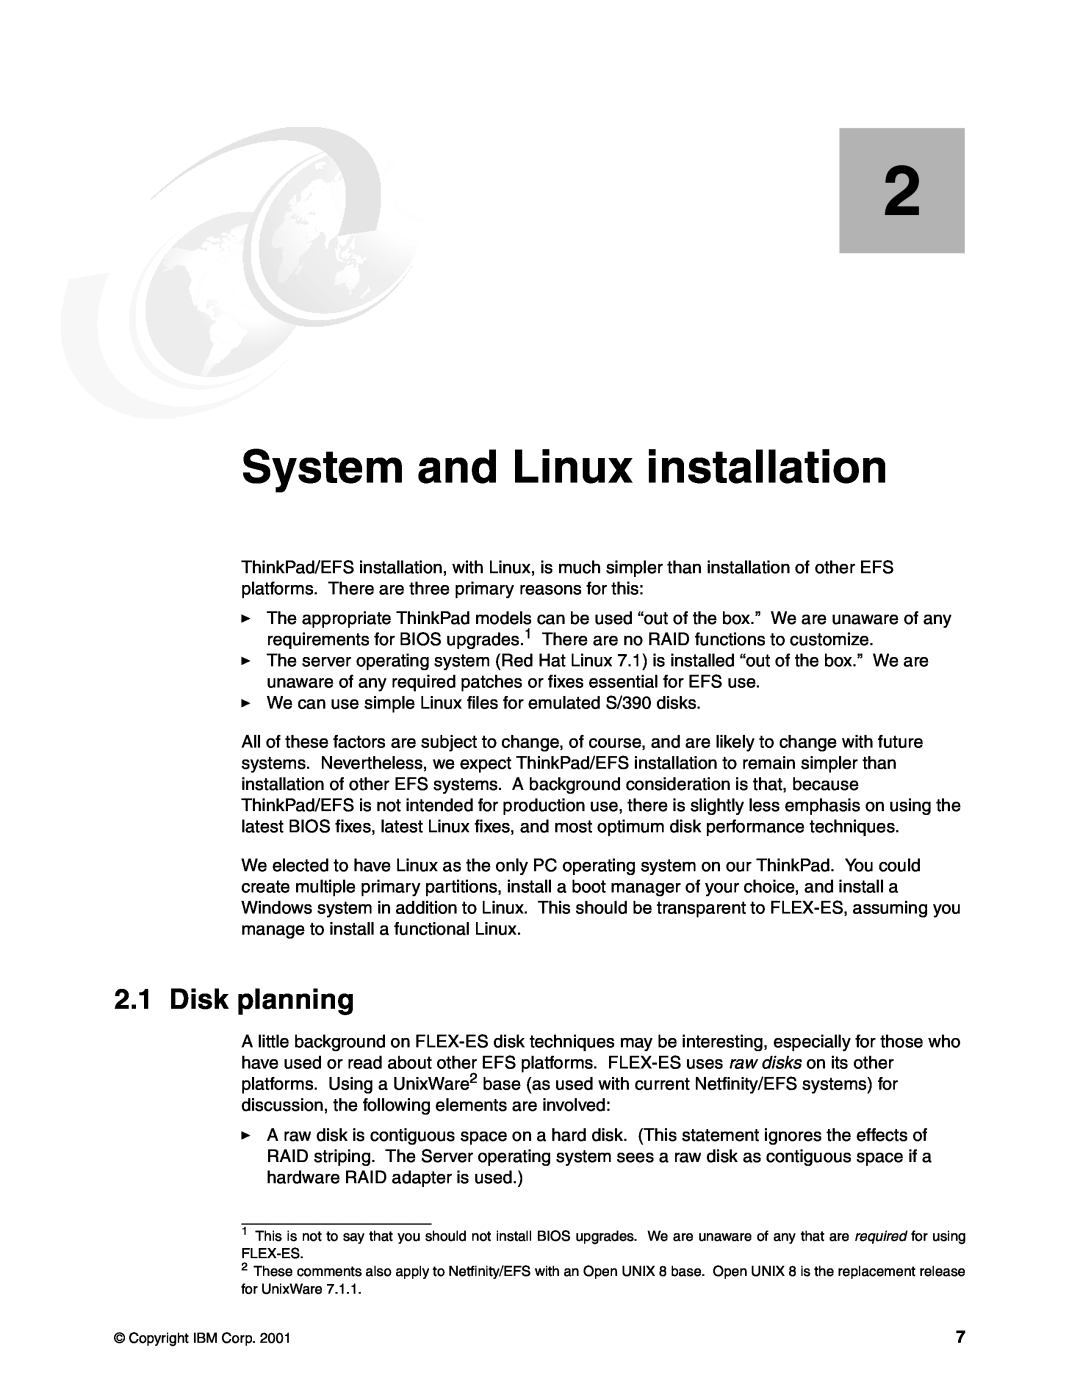 IBM s/390 manual System and Linux installation, Disk planning 